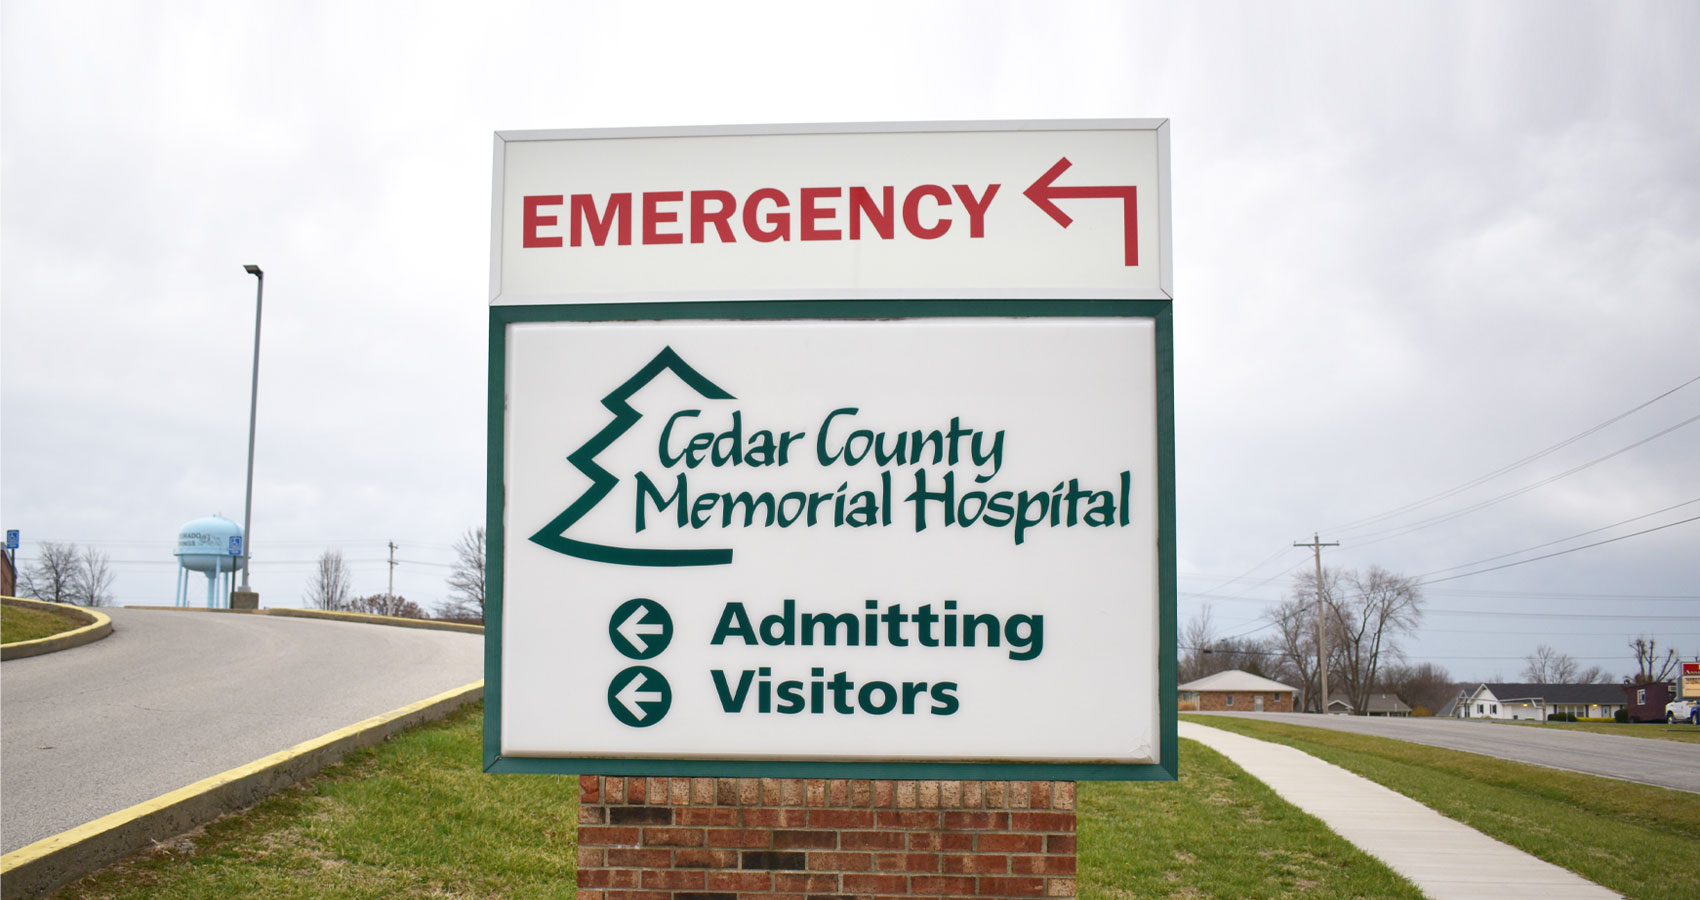 Banner picture of outdoor sign that says:

Cedar County Memorial Hospital
<- Admitting
<- Visitors